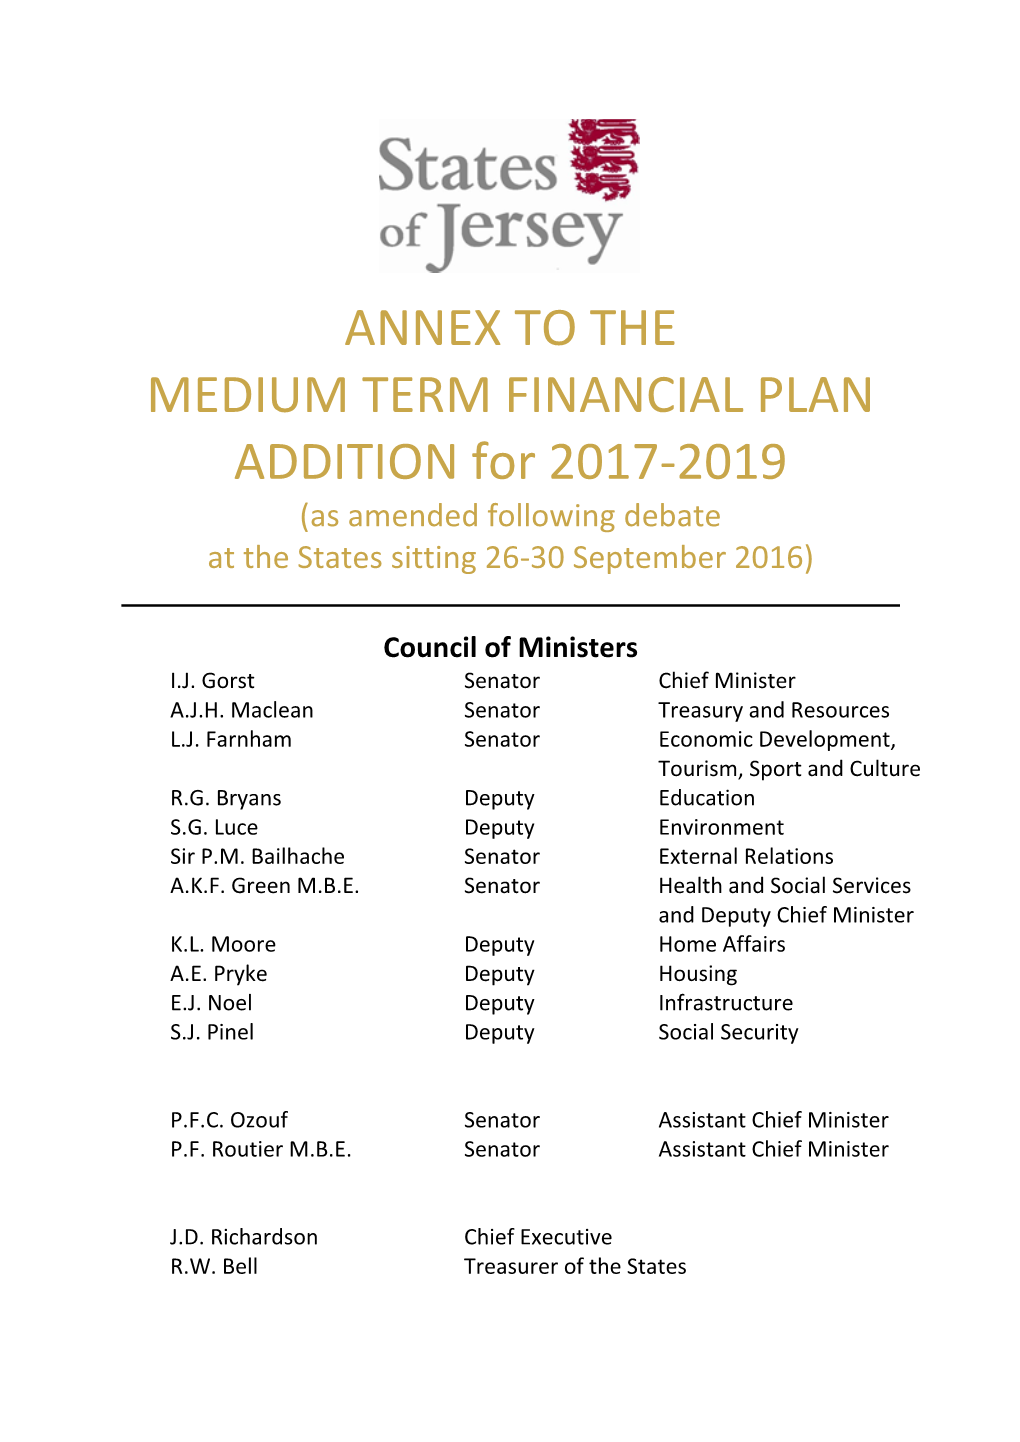 MEDIUM TERM FINANCIAL PLAN ADDITION for 2017-2019 (As Amended Following Debate at the States Sitting 26-30 September 2016)